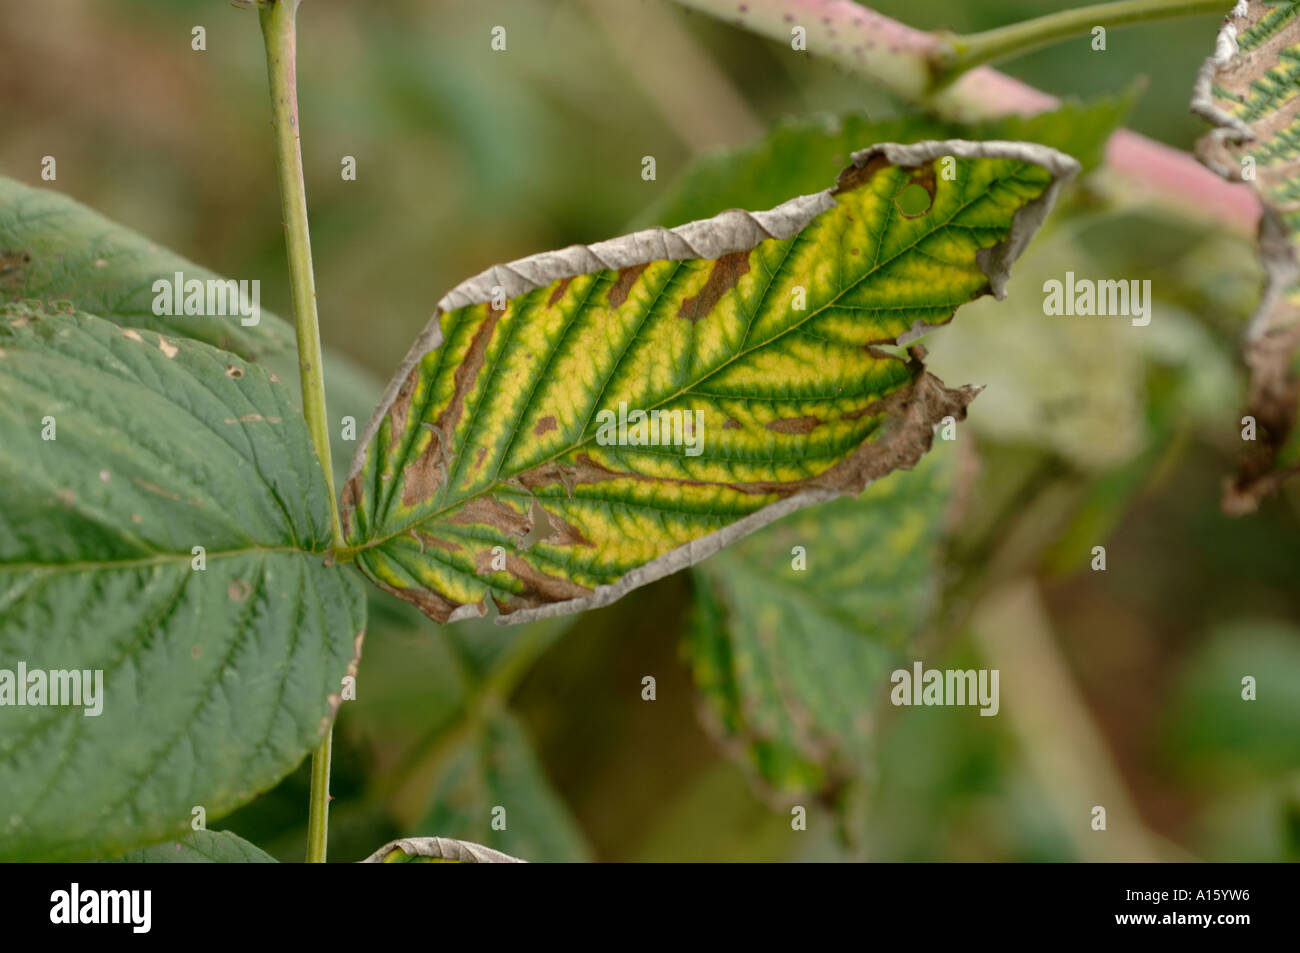 Contamination damage to raspberry leaves caused by glyphosate weedkiller contact Stock Photo